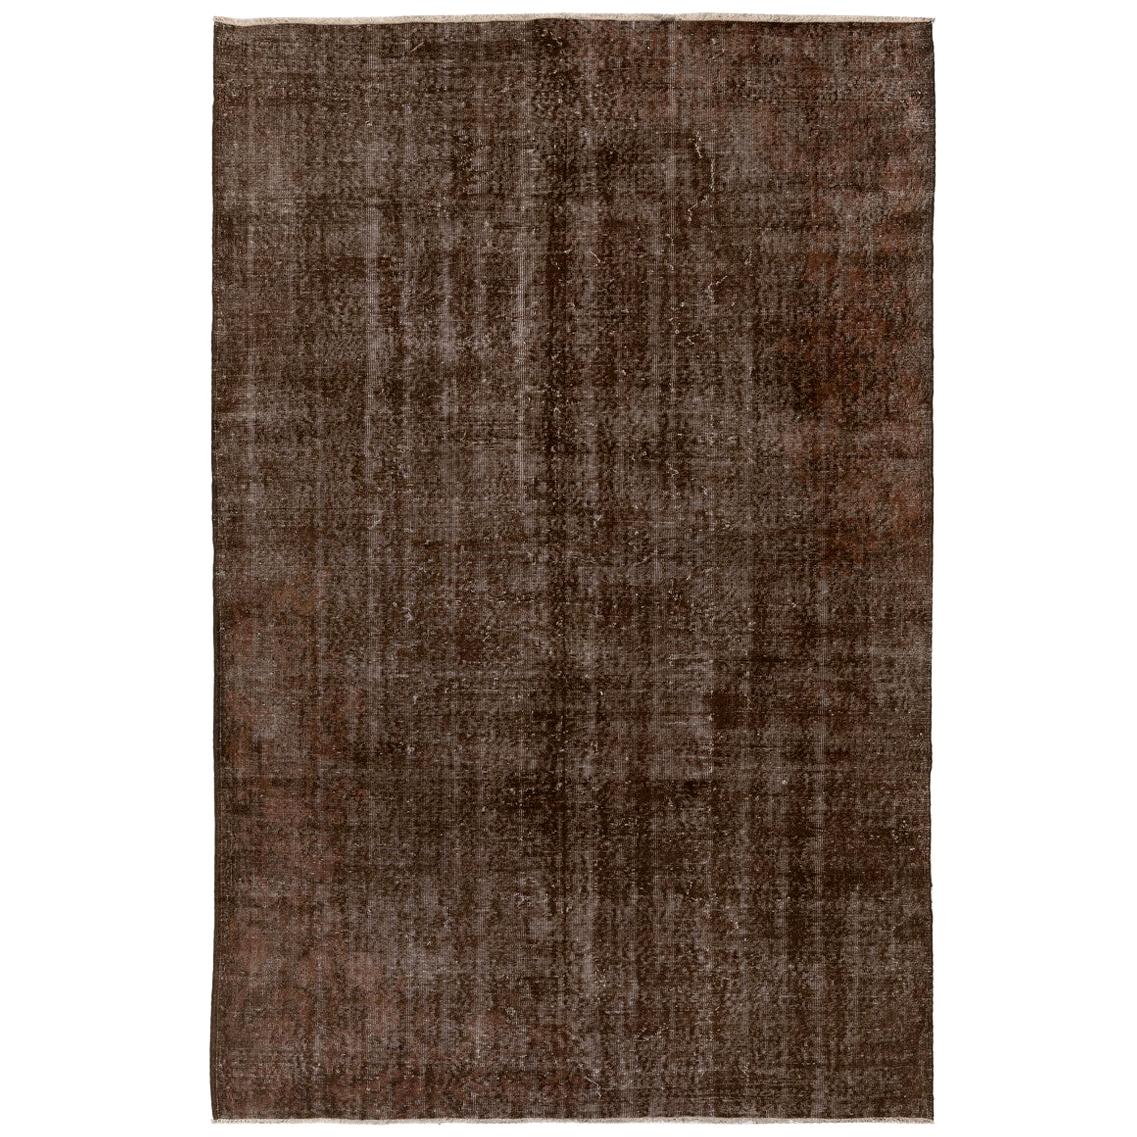 7.2x10.2 Ft Distressed Vintage Handmade Anatolian Rug Over-Dyed in Brown Color